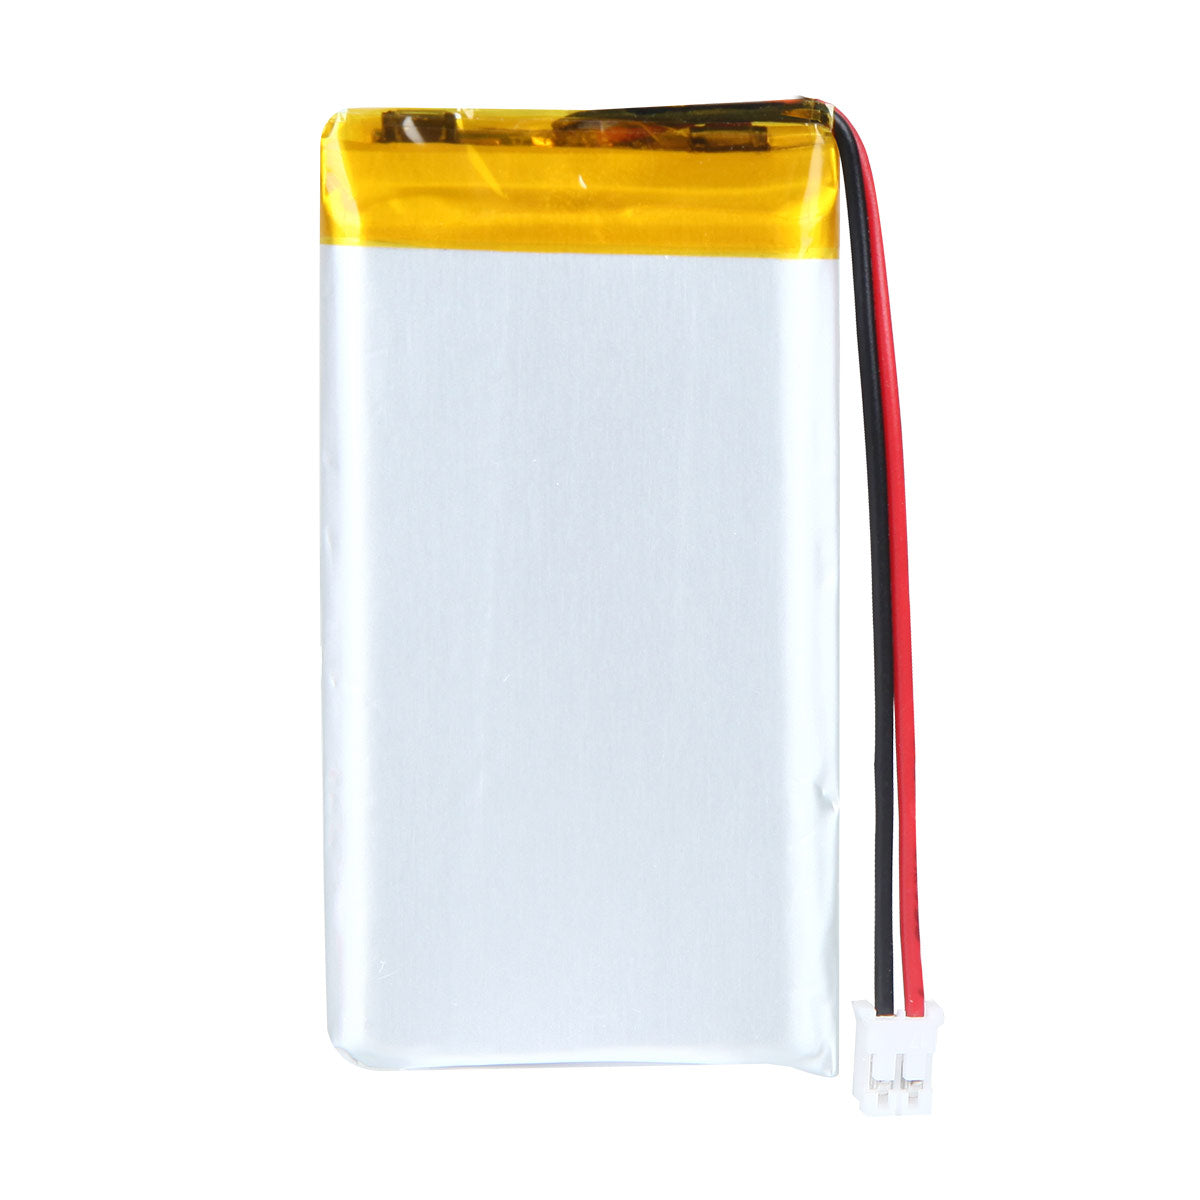 YDL 3.7V 1300mAh 603465 Rechargeable Lithium Polymer Battery